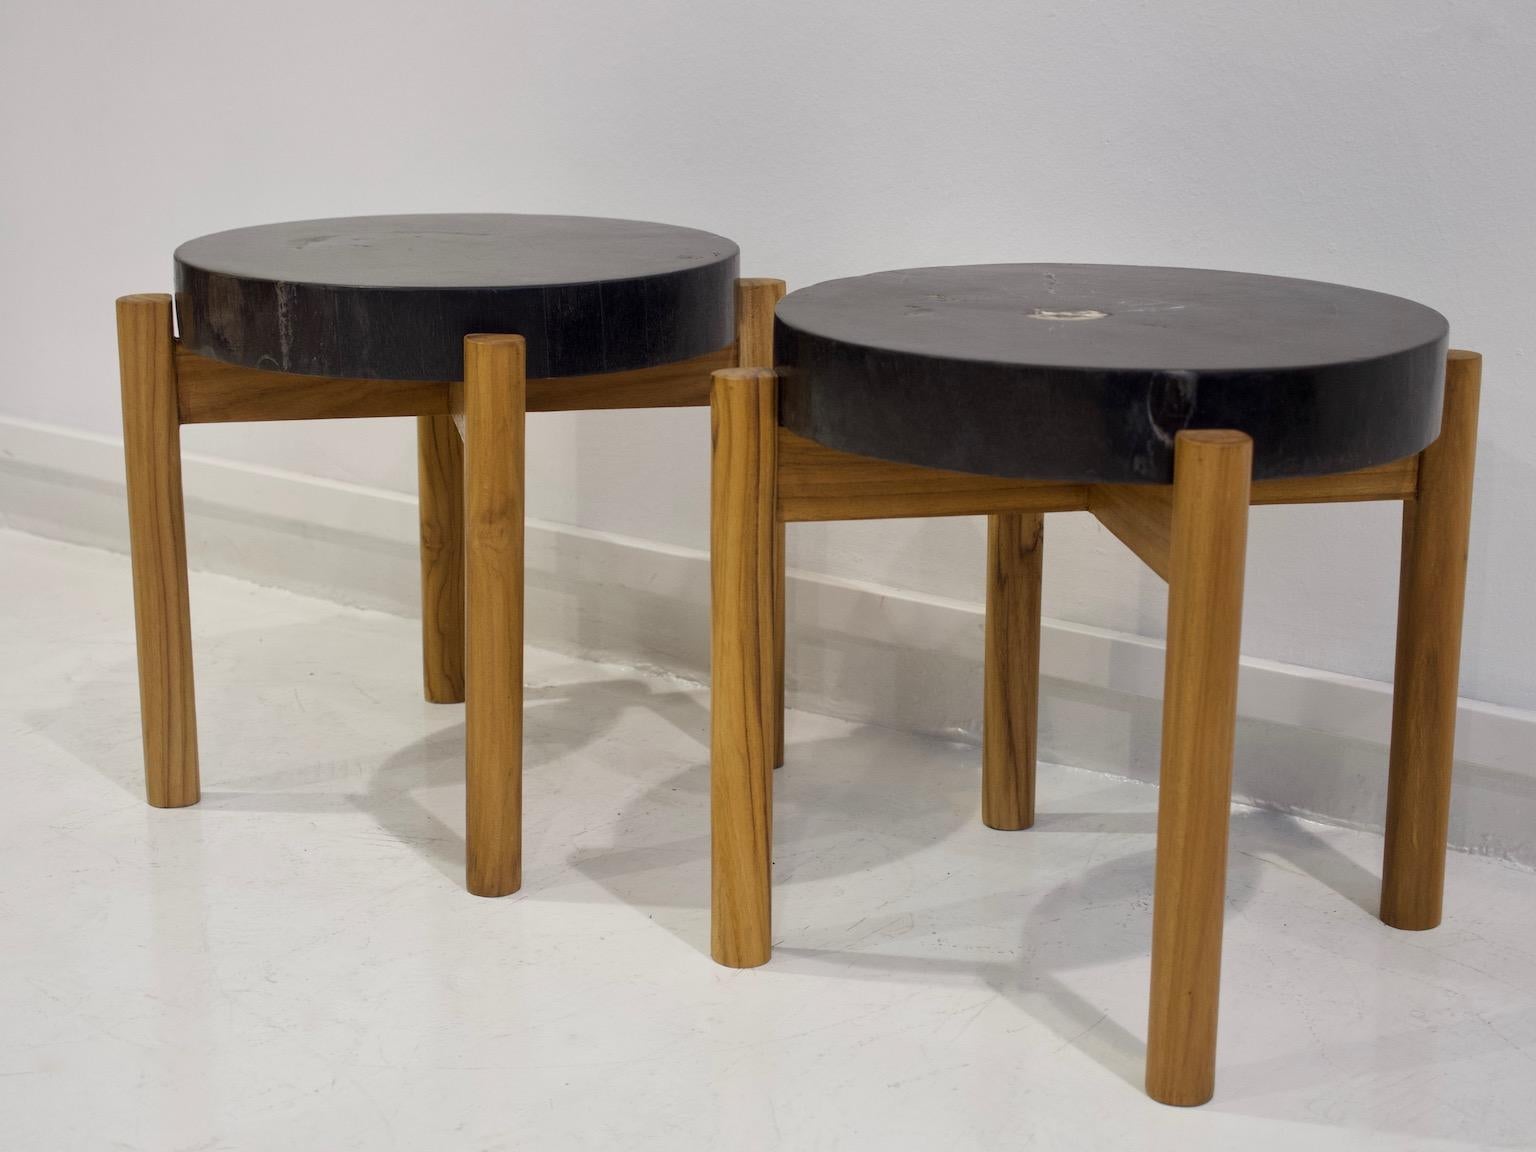 Pair of Side Tables with Wooden Feet and Dark Petrified Wood Top 1